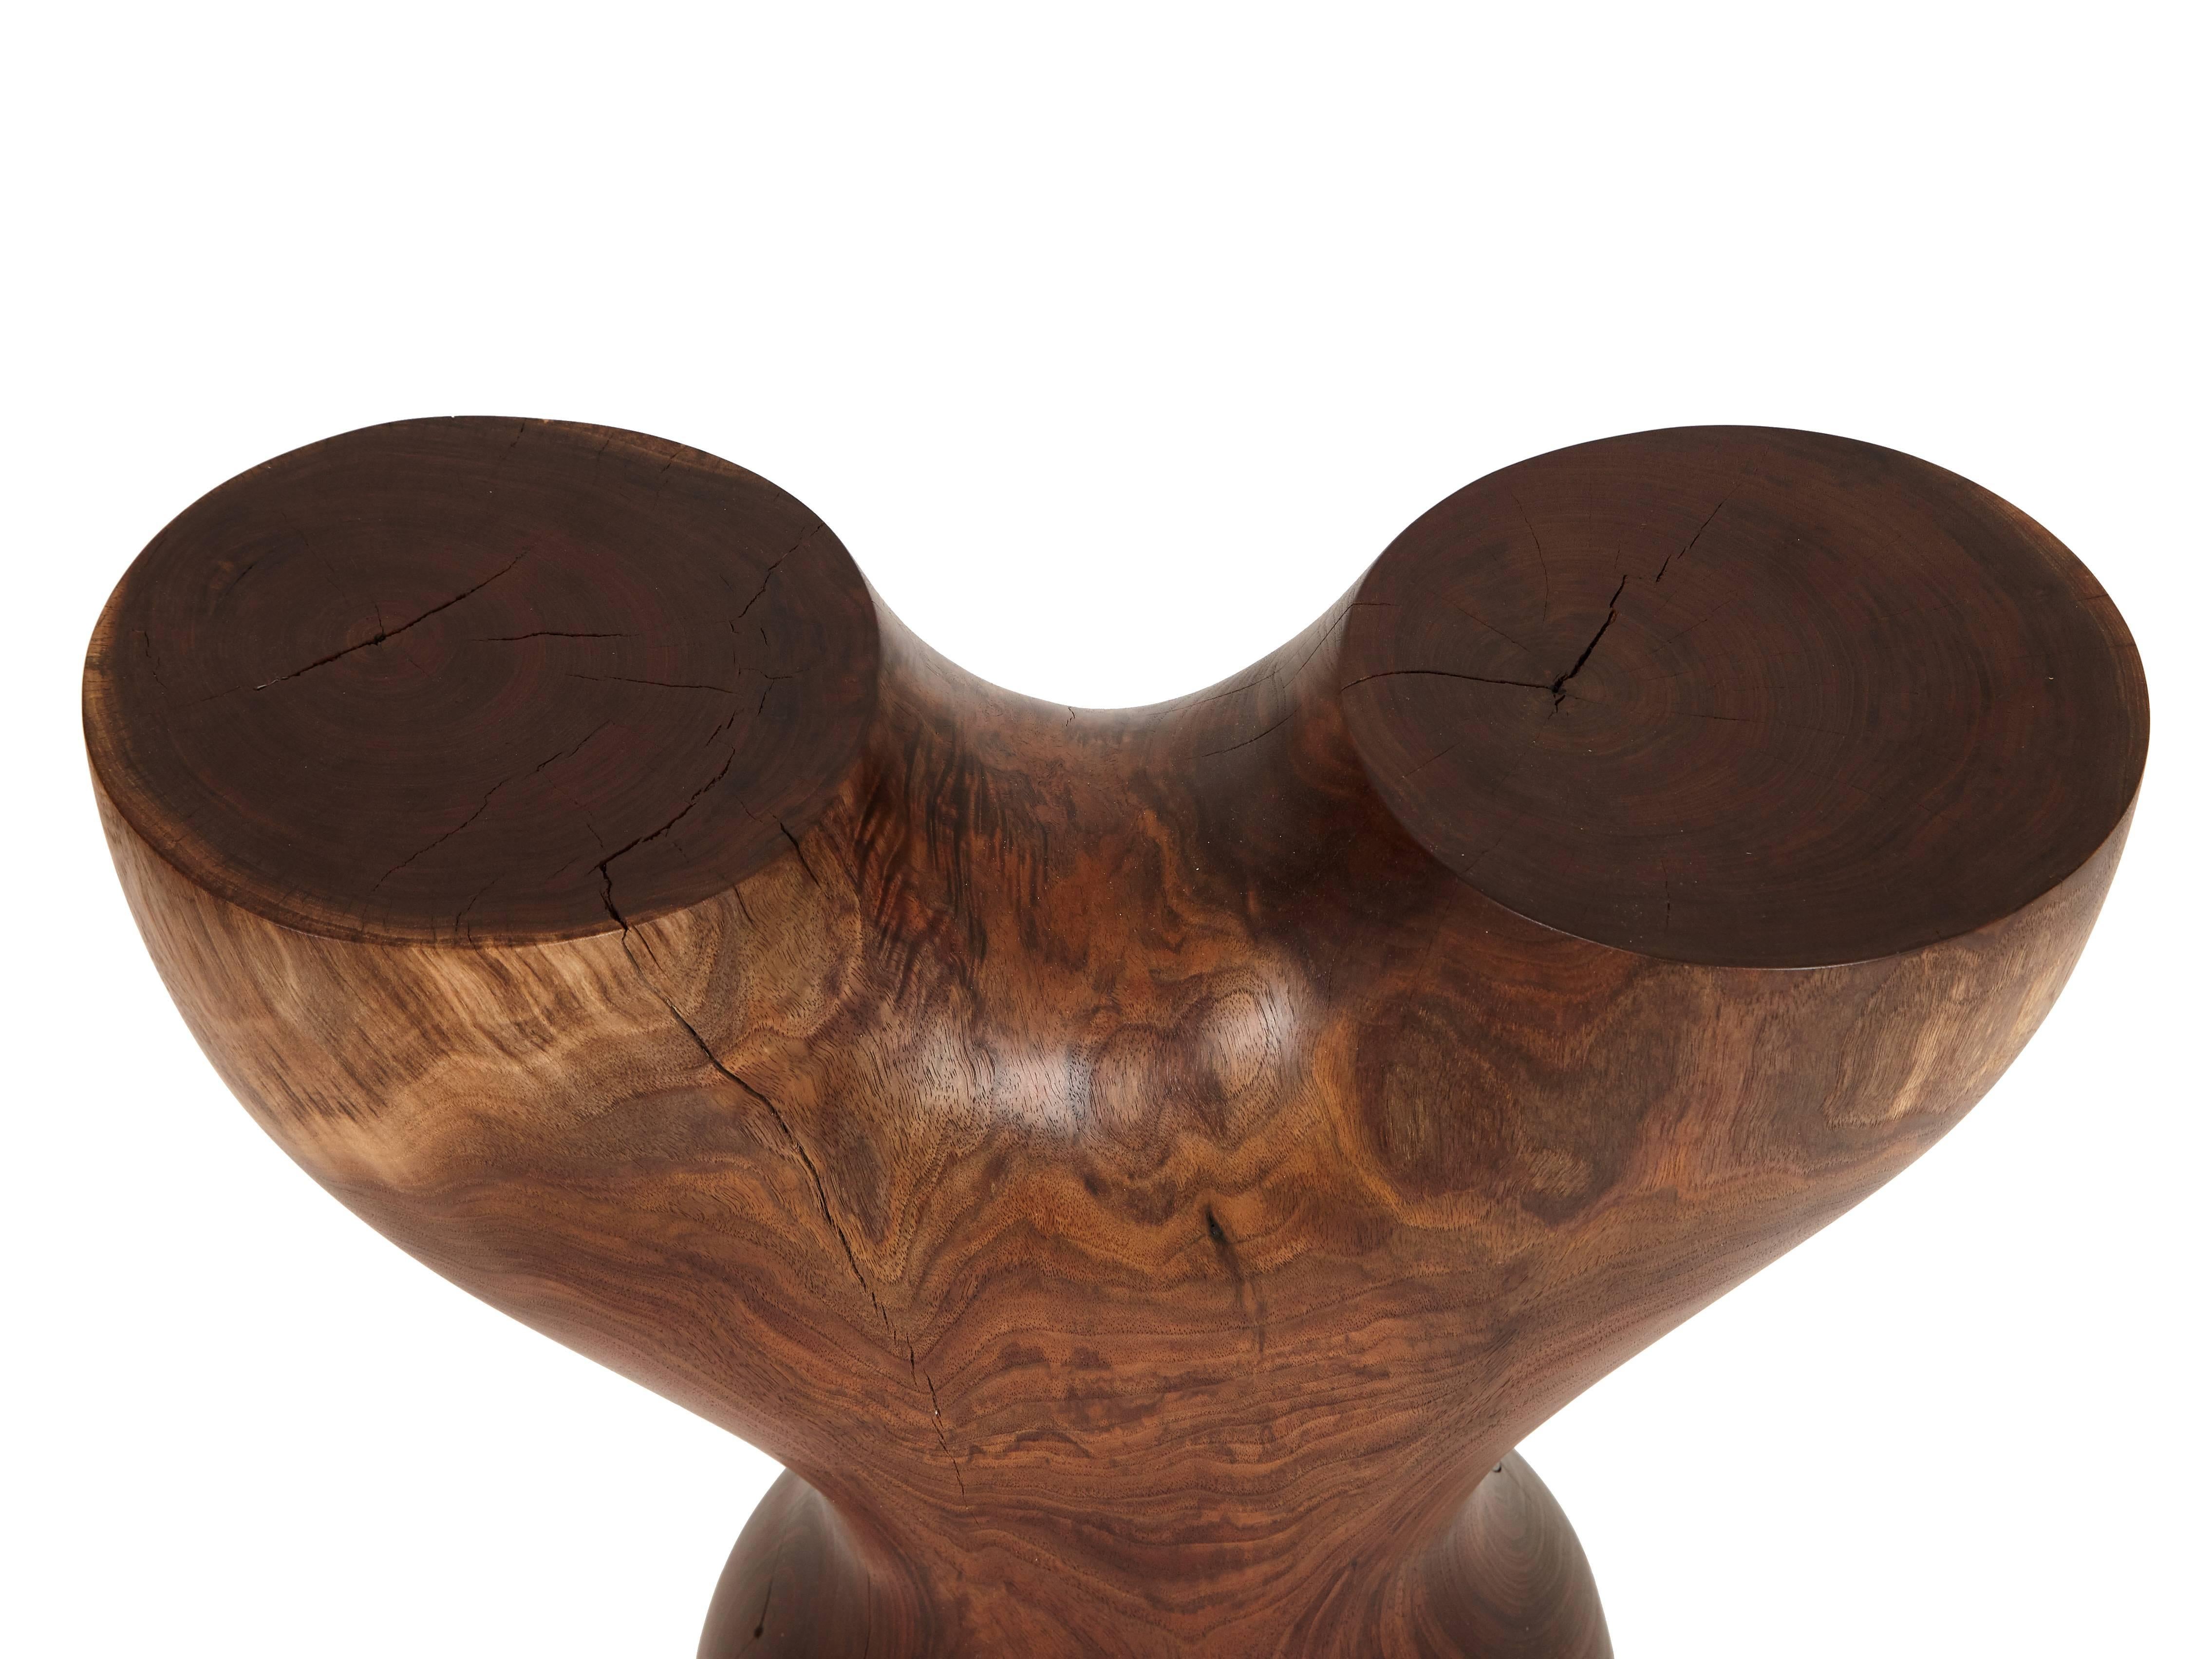 Walnut Y Stool by Caleb Woodard from solid Walnut circa 2017. Hand-carved highly sculpted organic form kiln dried to control splitting over time finished with a white oil hand rubbed finish.